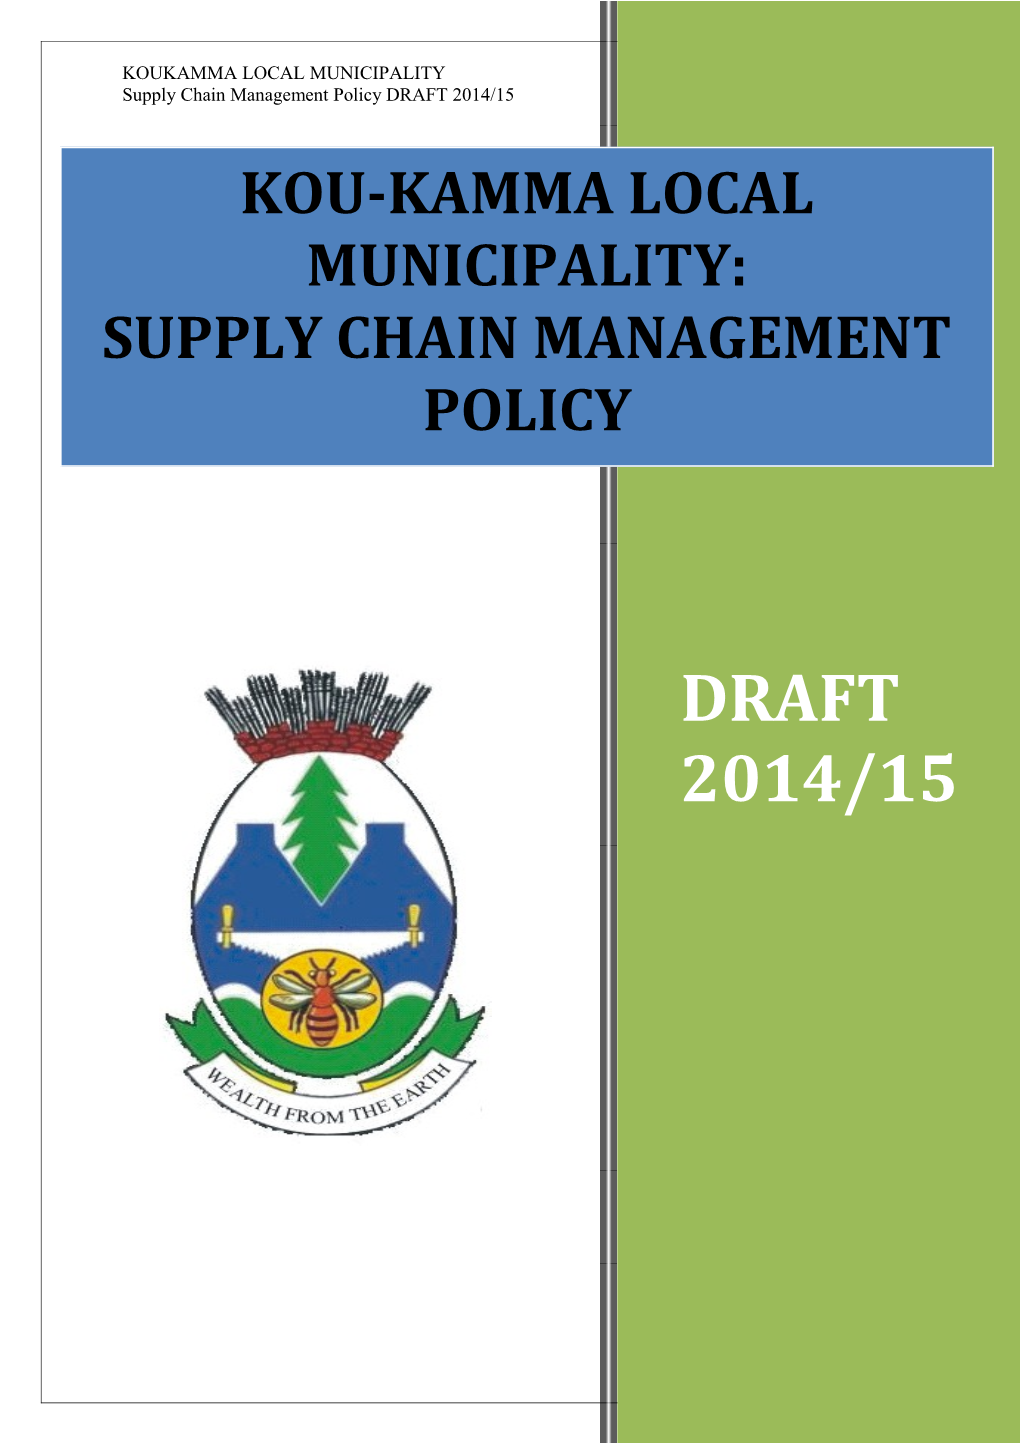 Supply Chain Management Policy DRAFT 2014/15